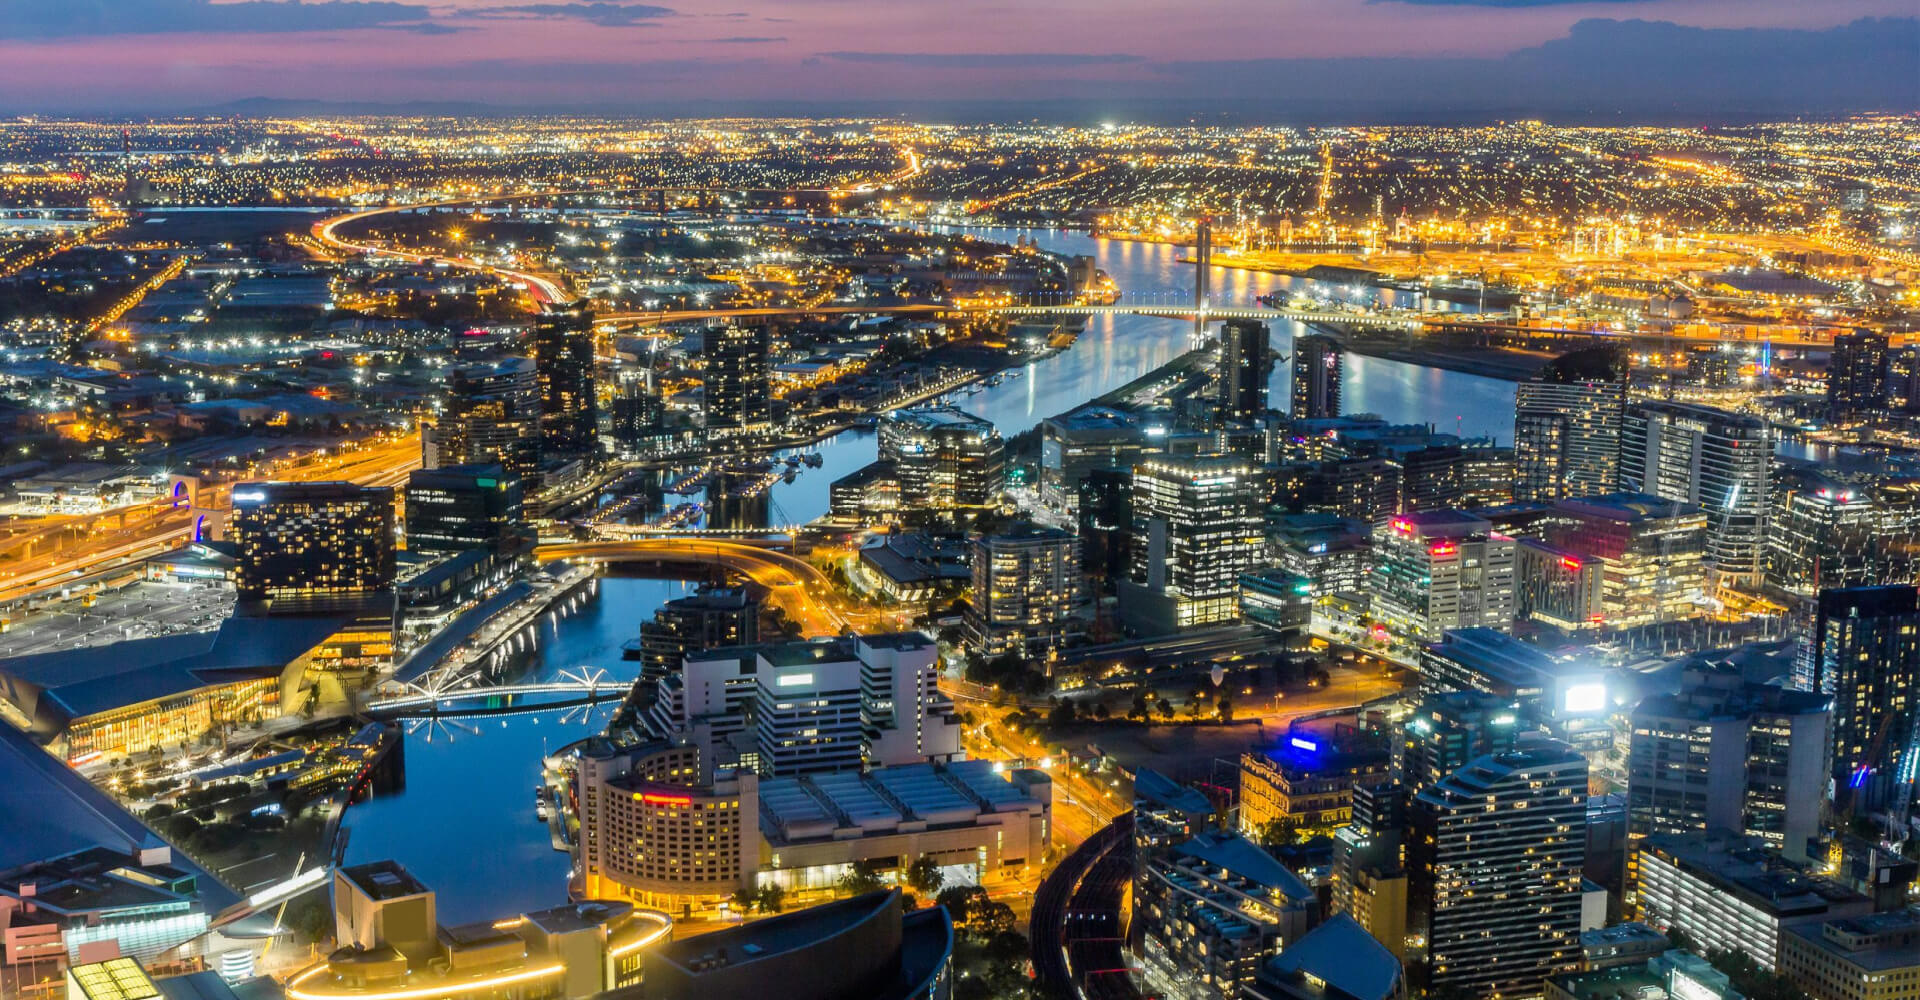 Melbourne City Aerial View Panorama Skyline Cityscape, Harbour, Seafarers Bridge, Bolte Bridge over Yarra River at Dusk Evening Sunset from Eureka Tower on South Bank, Victoria, Australia